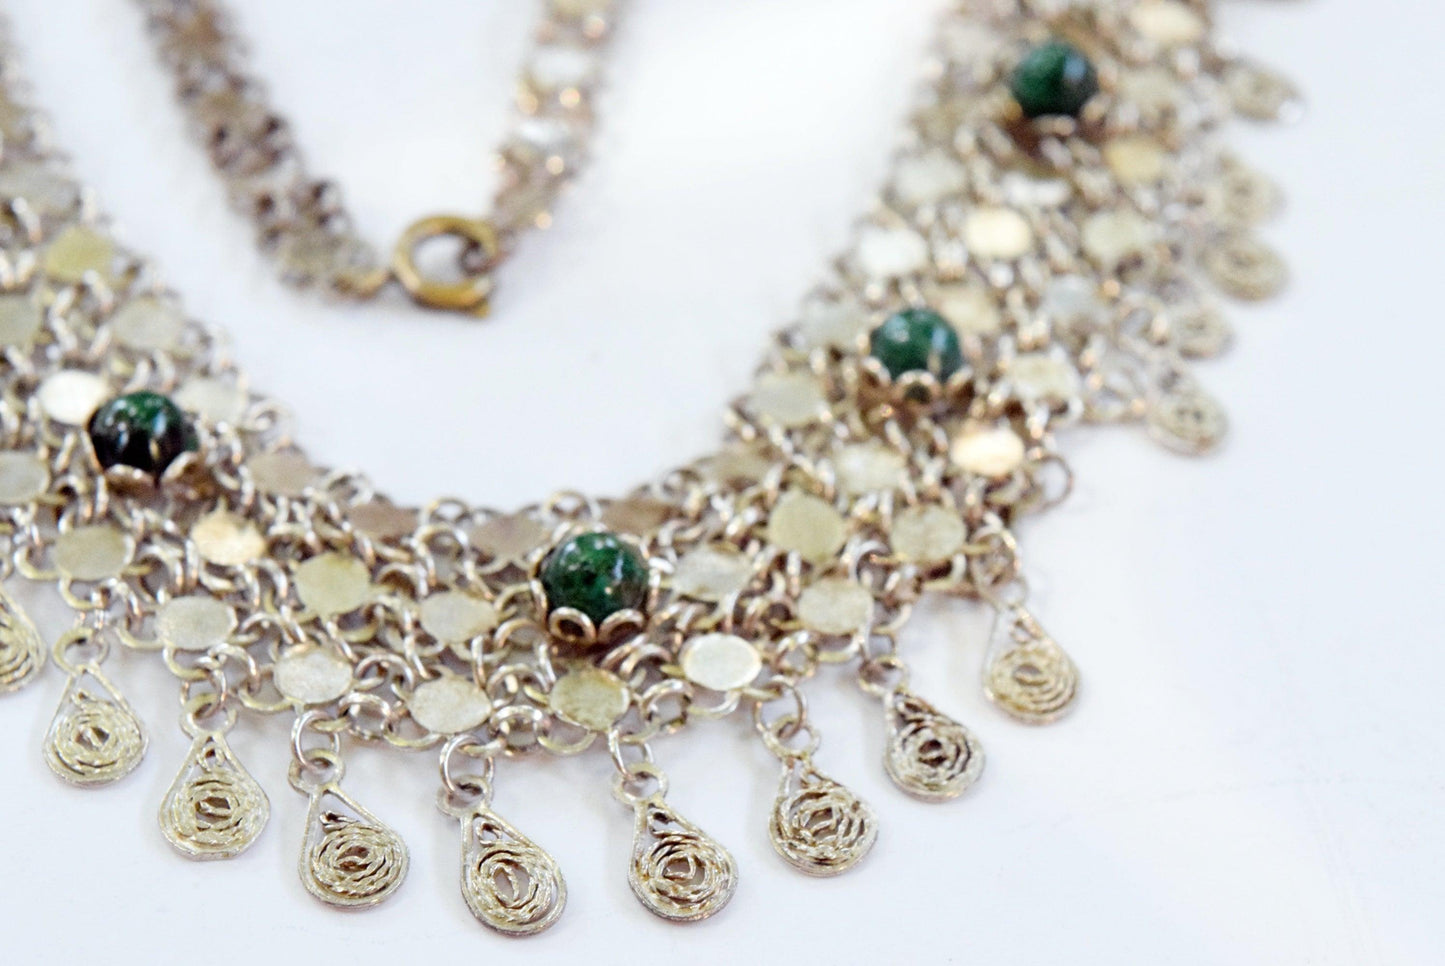 Middle East Silver and Chrysoprase Filigree Necklace - Anteeka